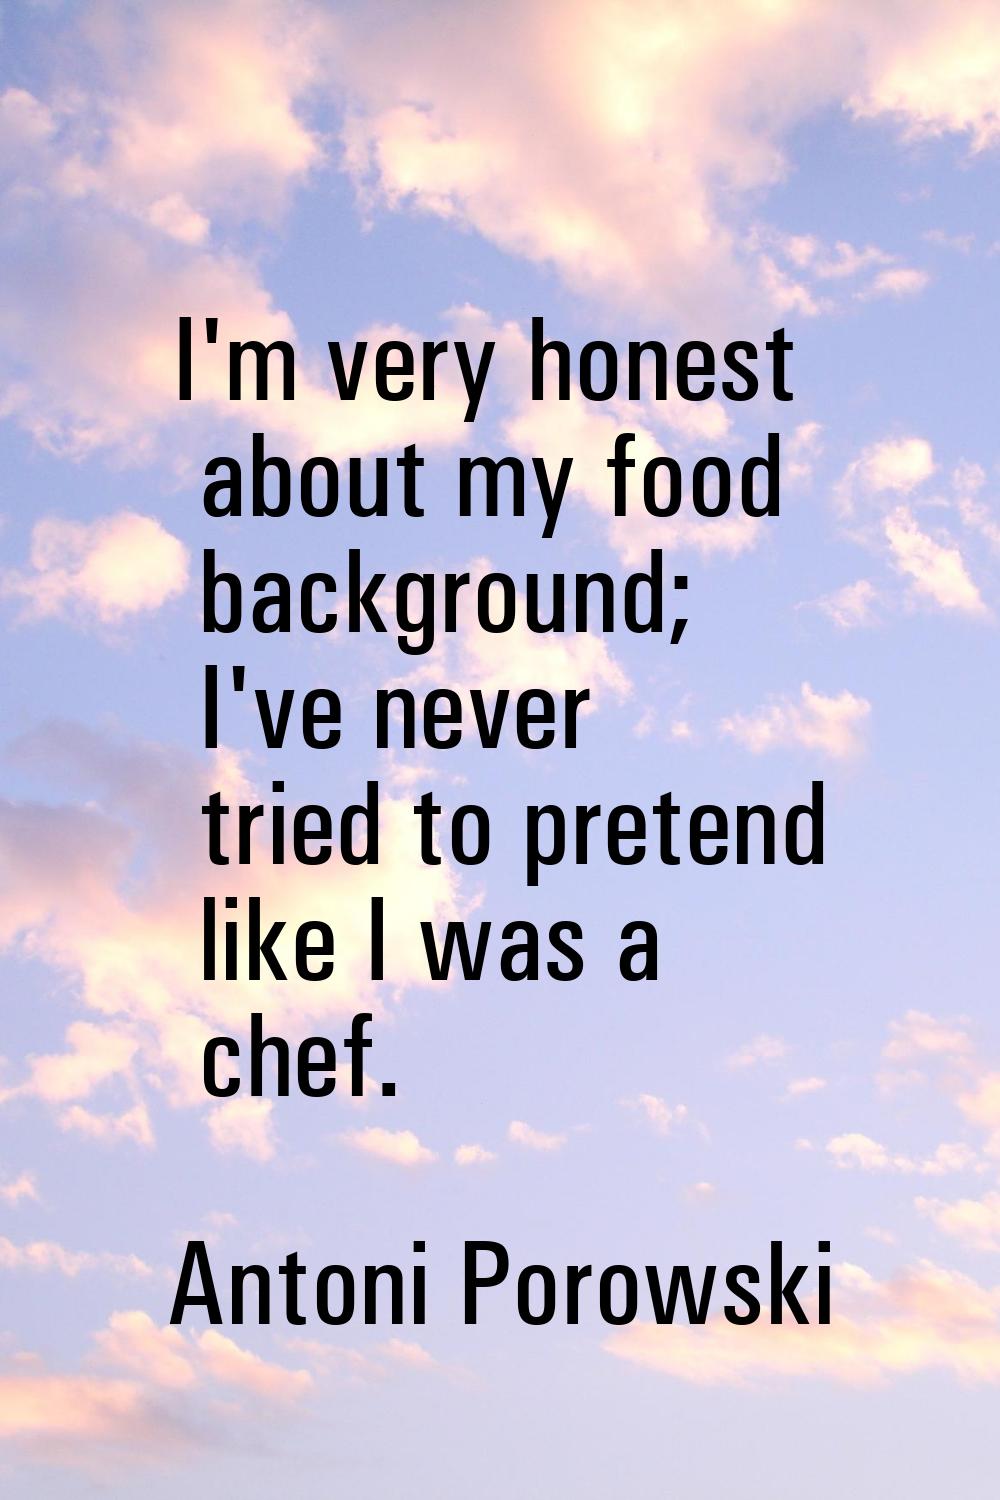 I'm very honest about my food background; I've never tried to pretend like I was a chef.